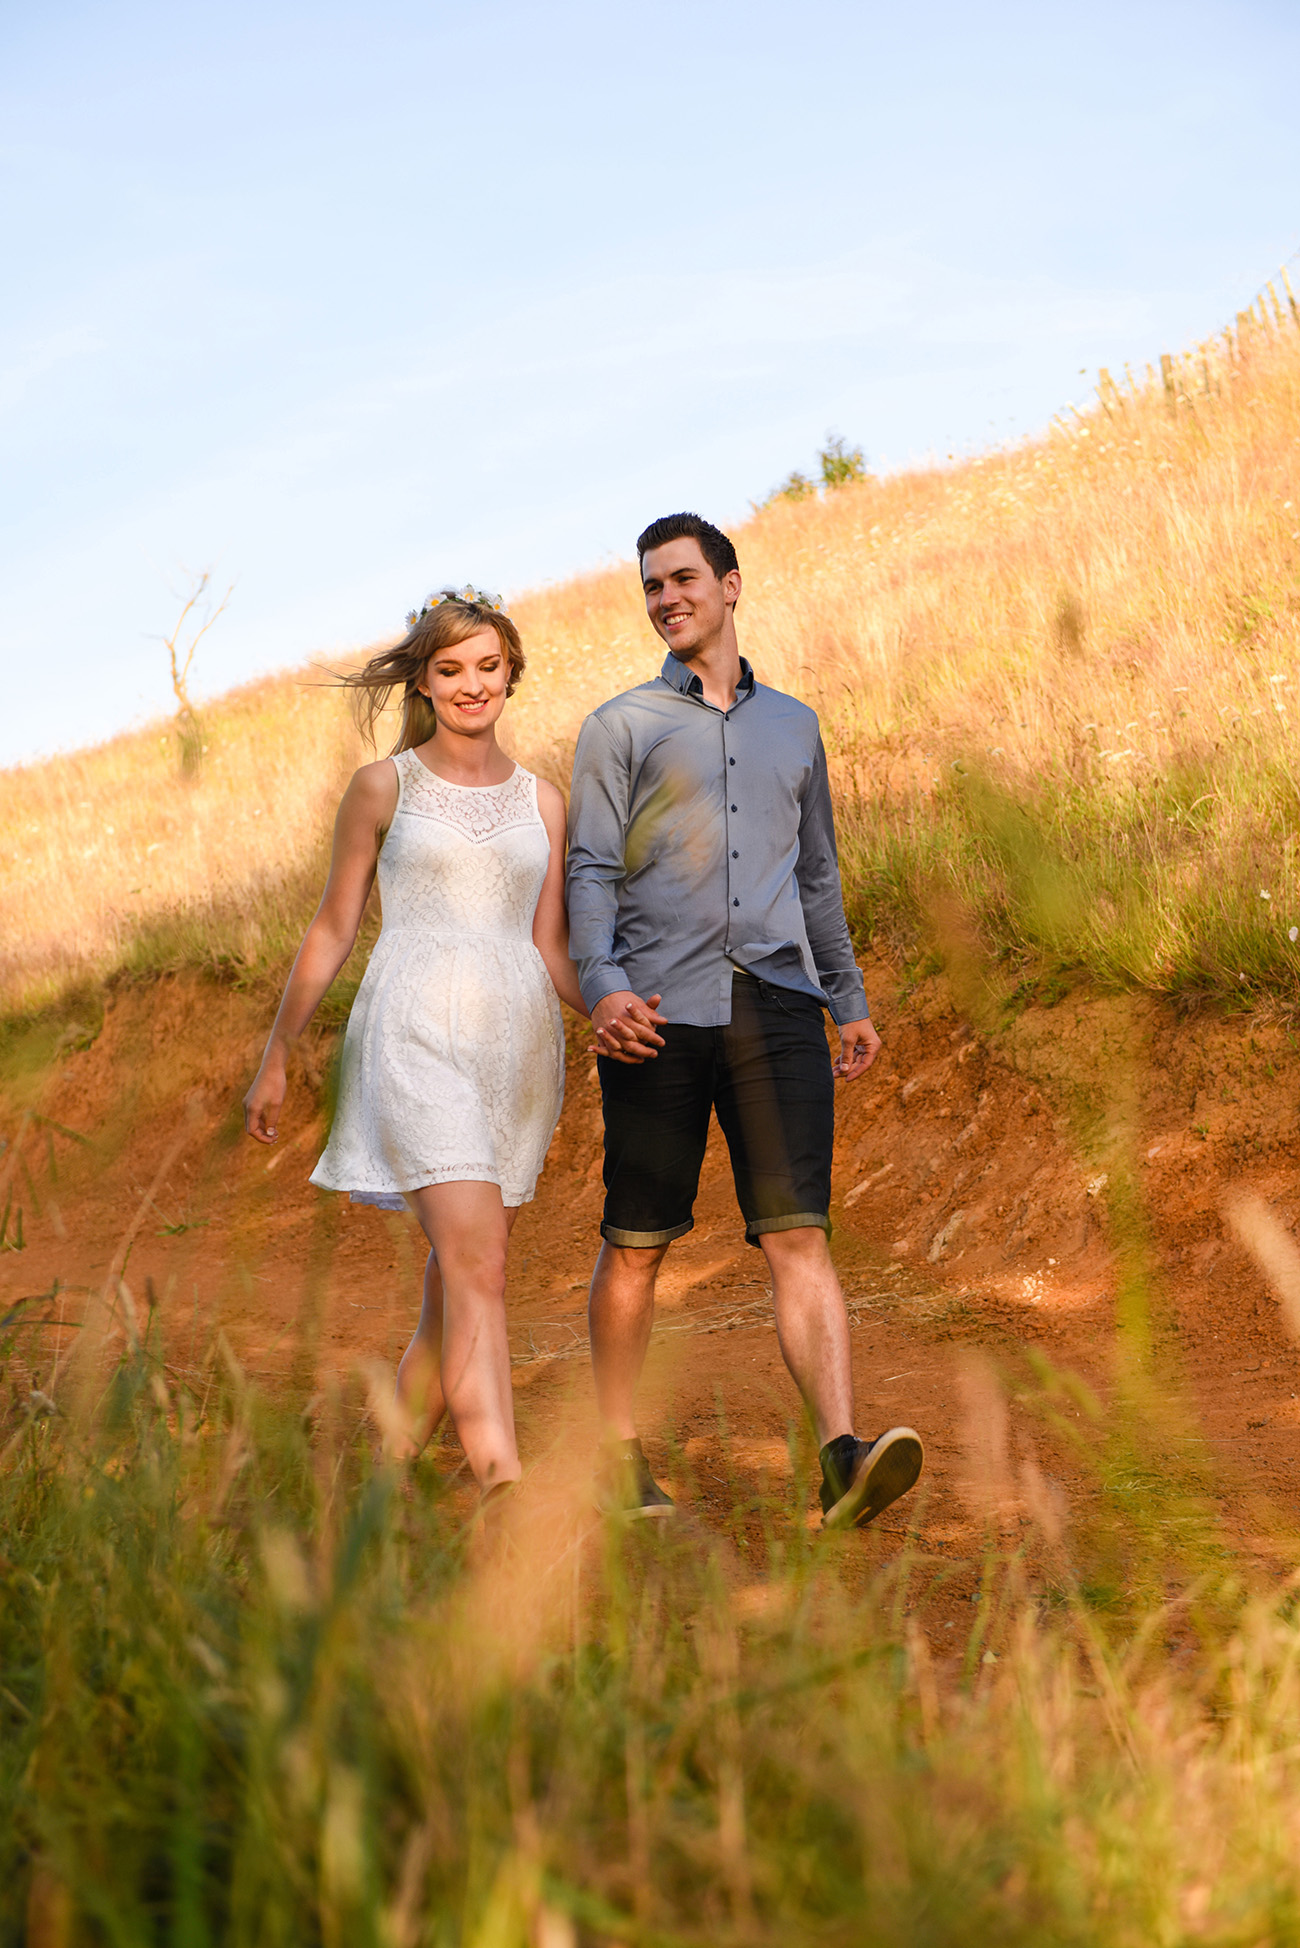 A frontal view of the engaged couple hand-in-hand Summer Country Engagement photo shoot Pukekokhe Auckland Photographer Anais Chaine